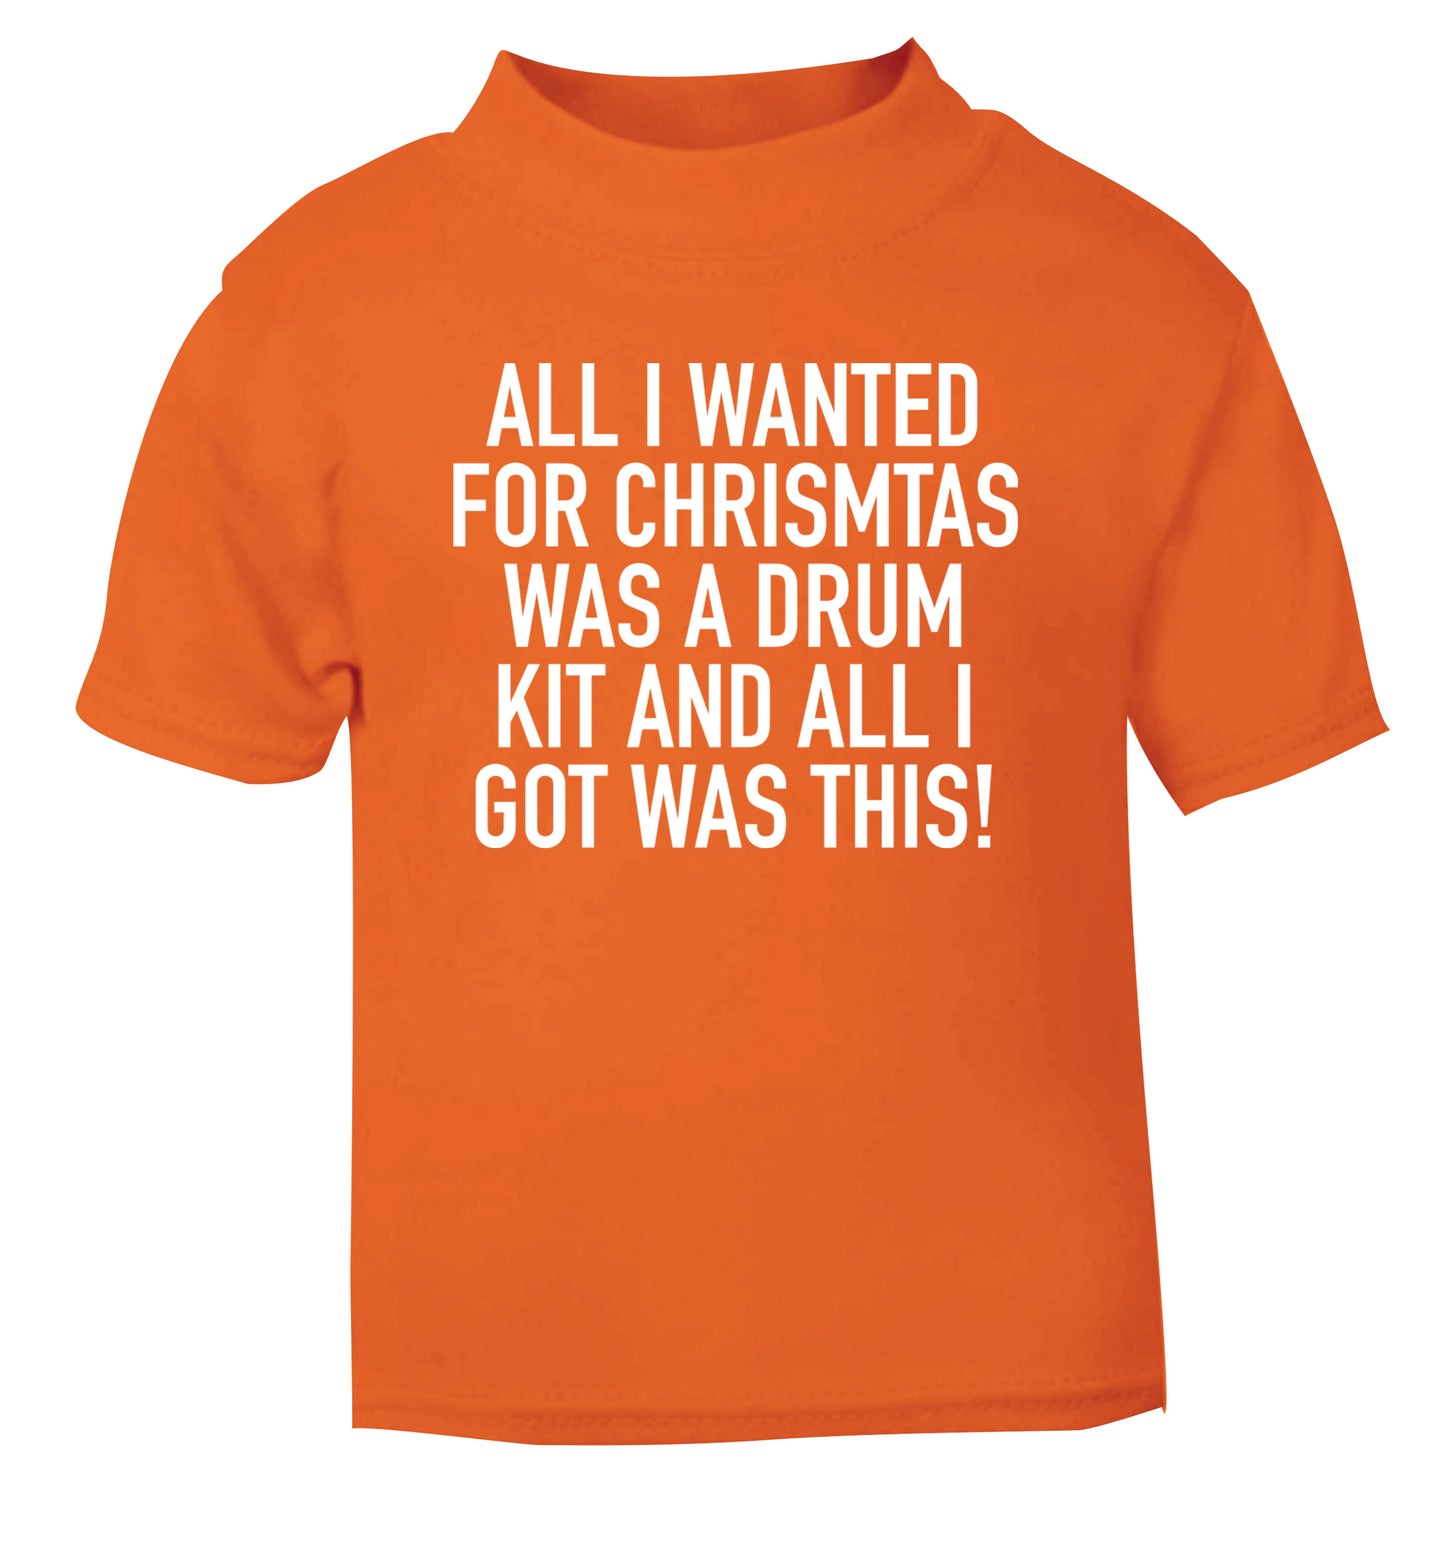 All I wanted for Christmas was a drum kit and all I got was this! orange Baby Toddler Tshirt 2 Years